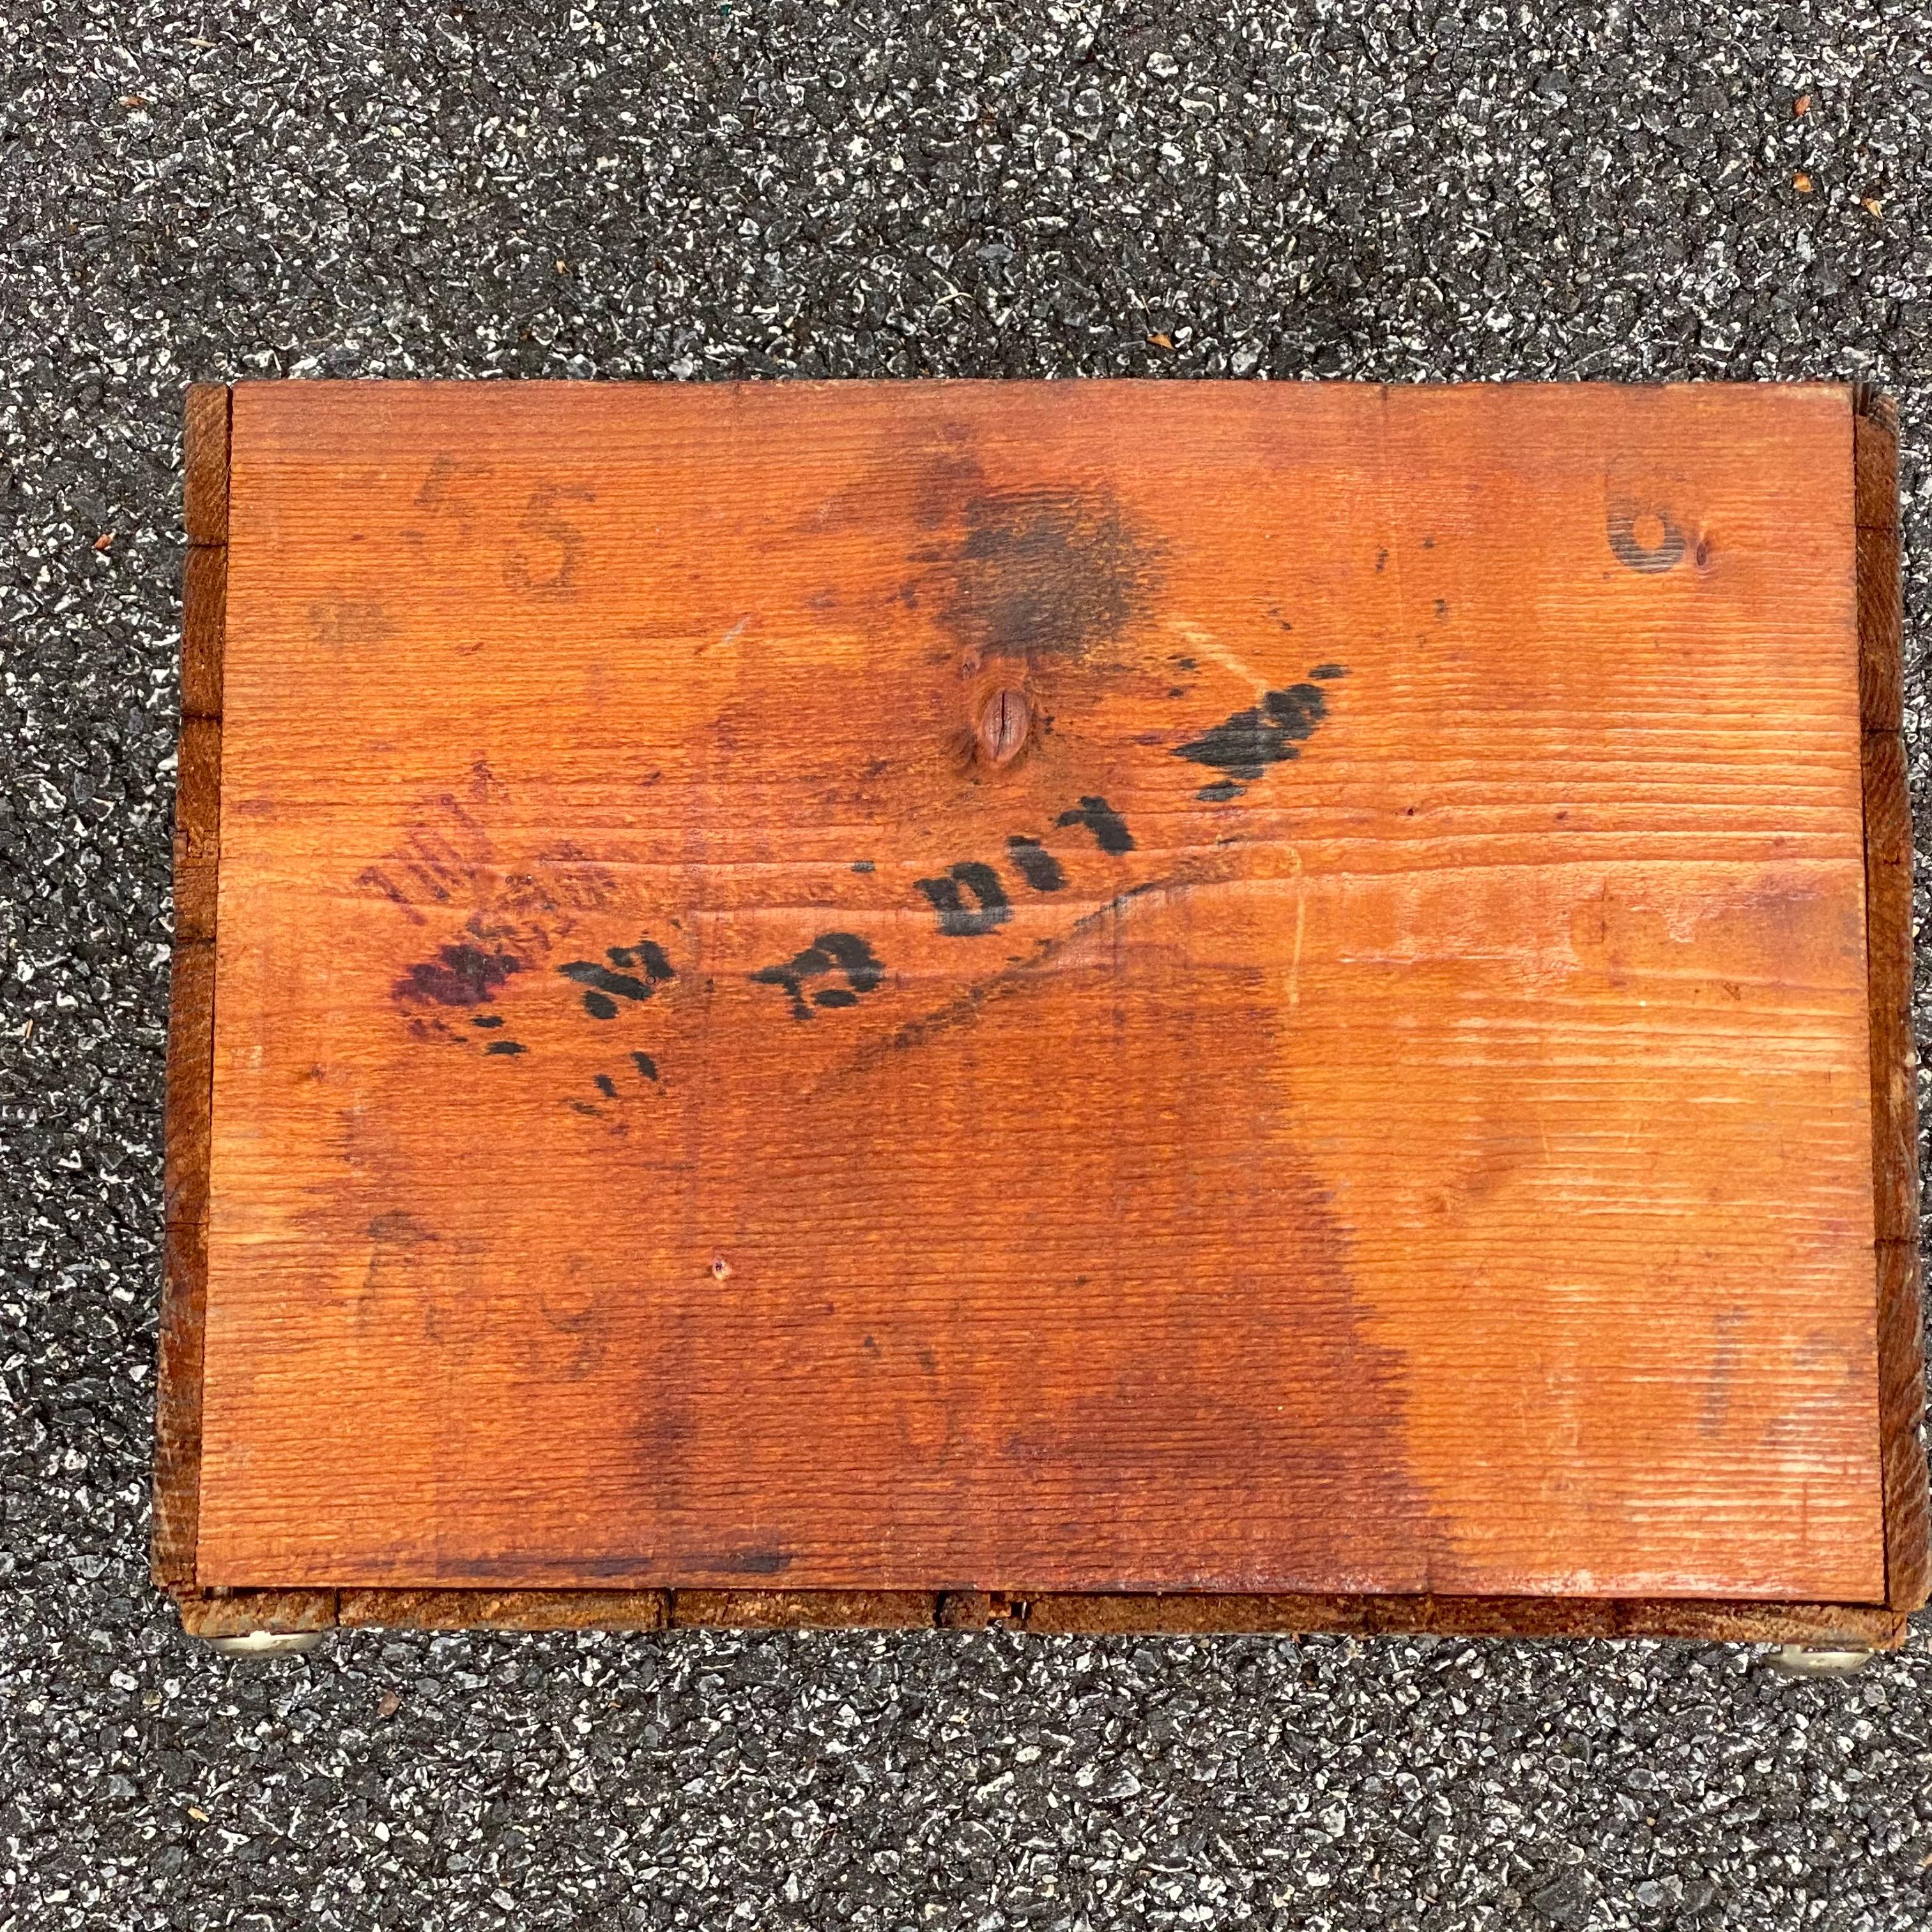 Scottish 1950's Haig & Haig Wooden Whisky Crate For Sale